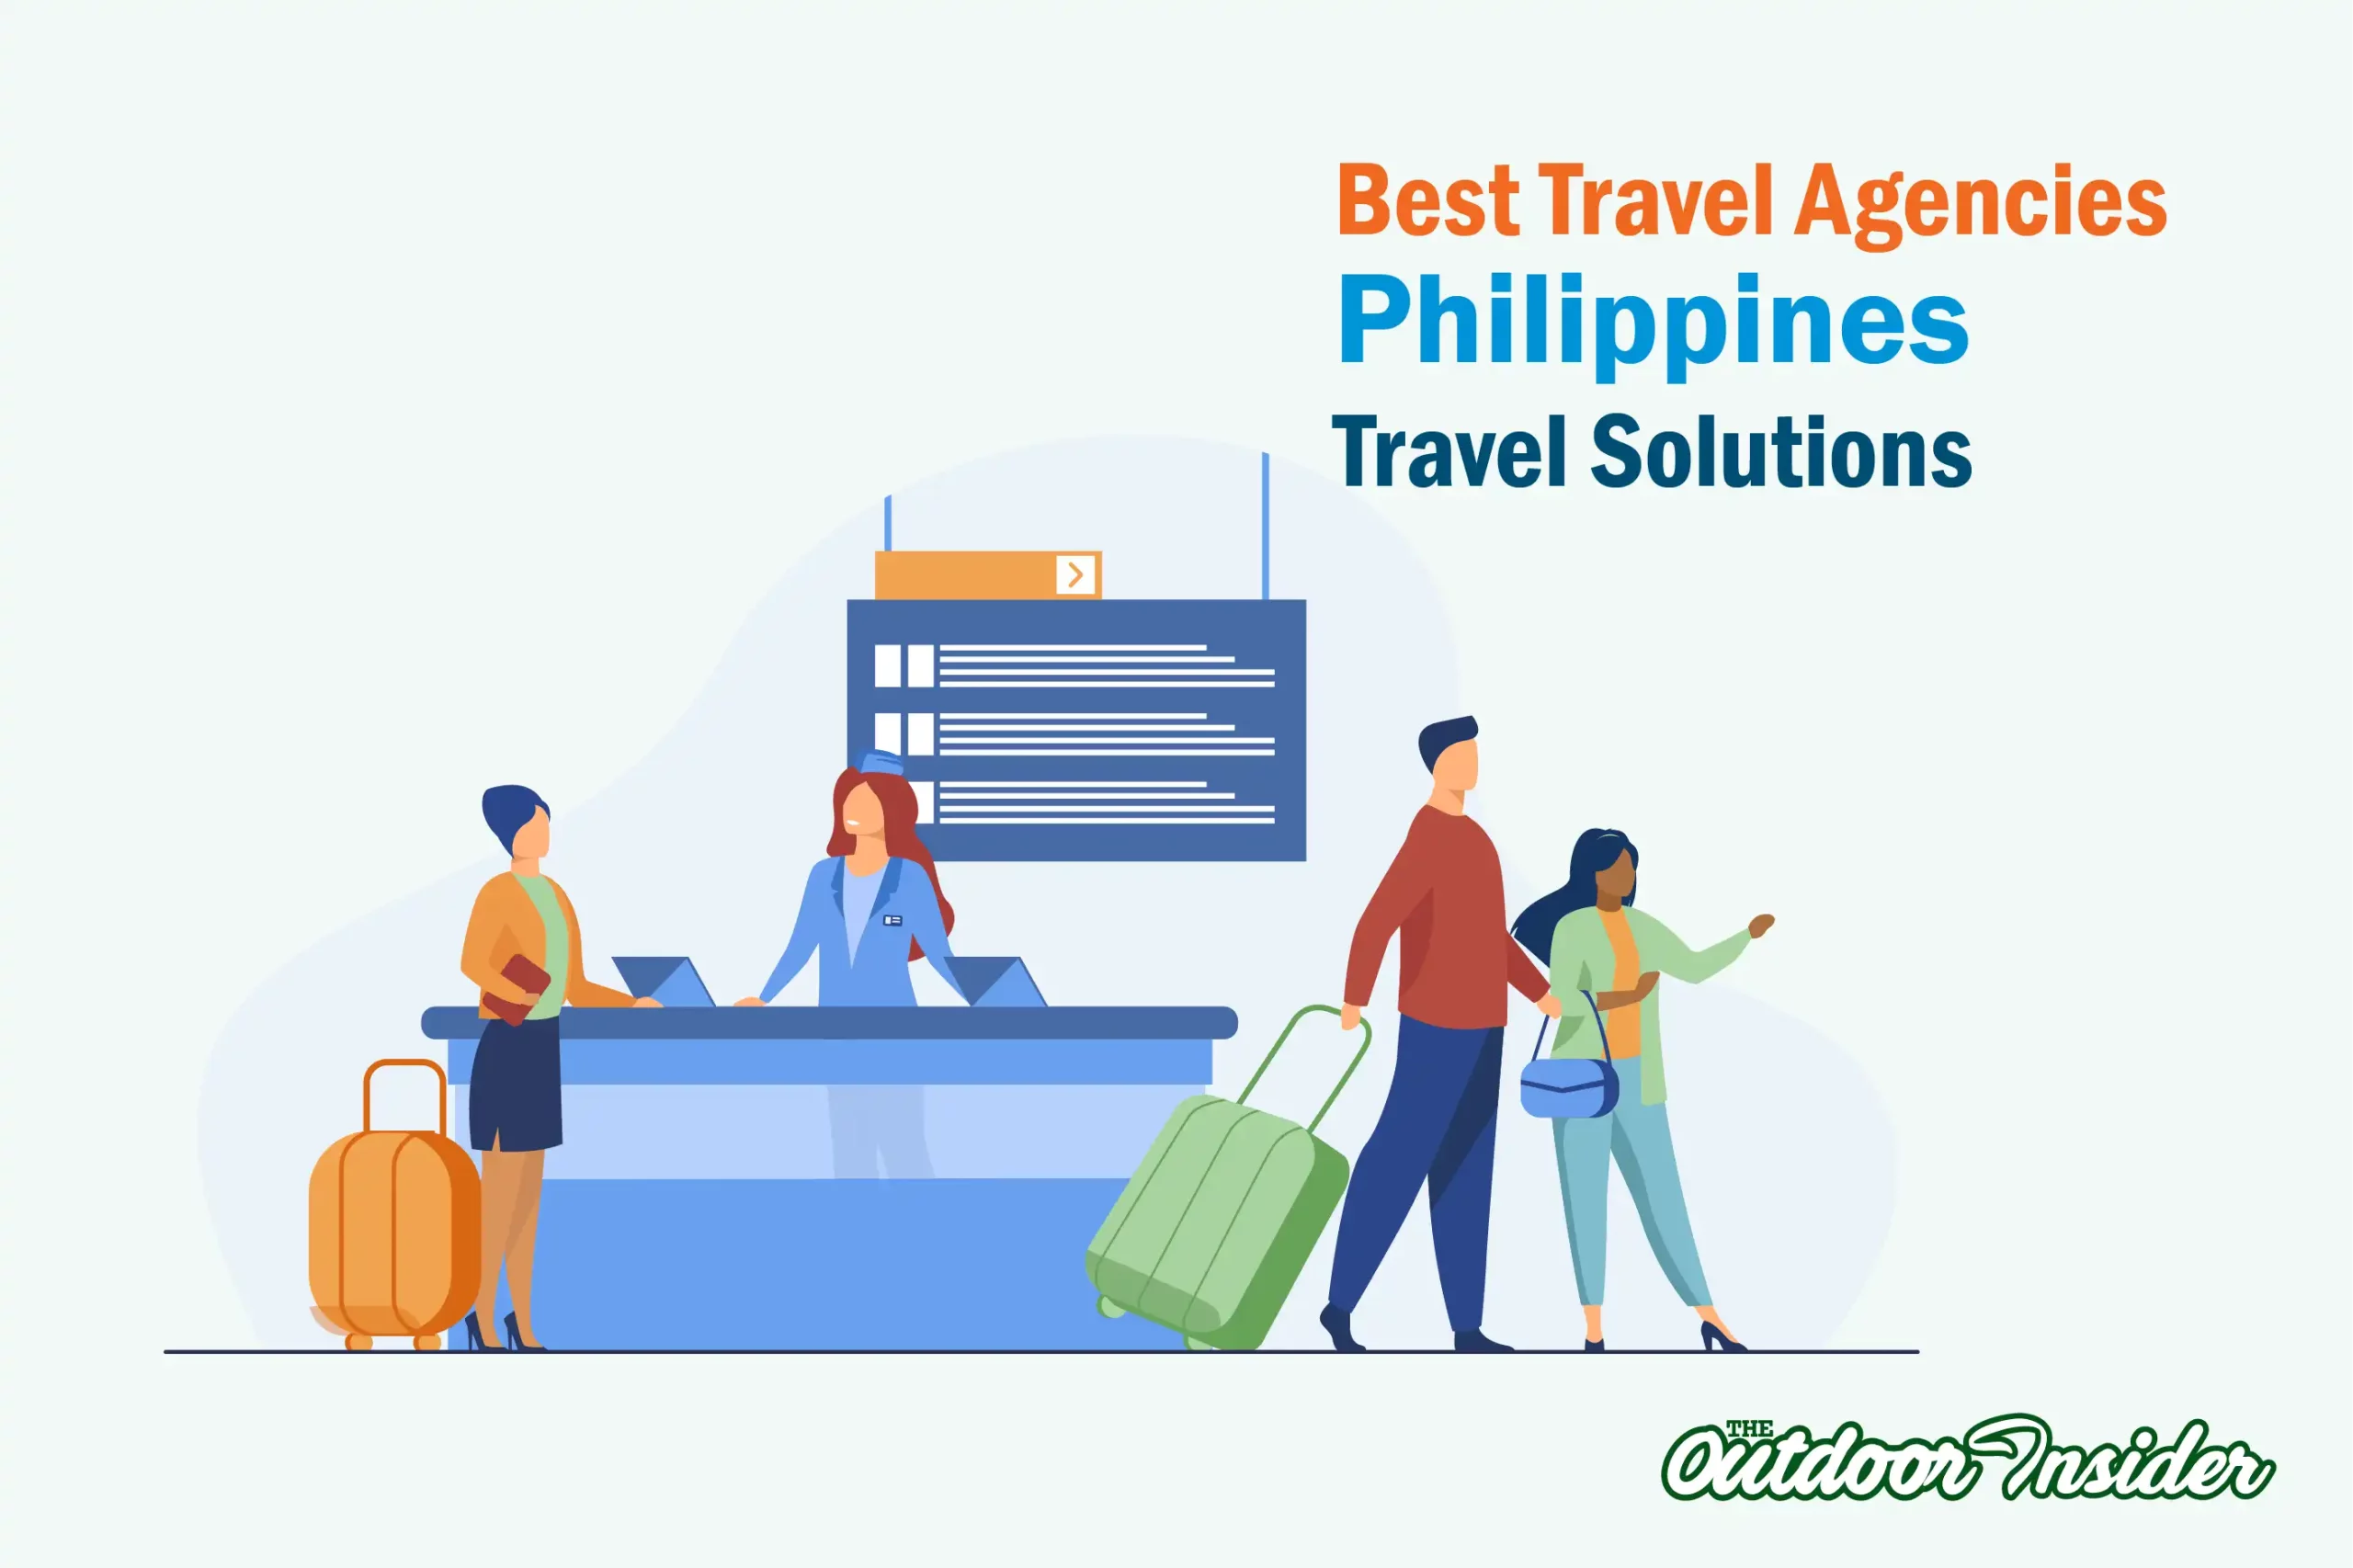 Travel Agencies in the Philippines